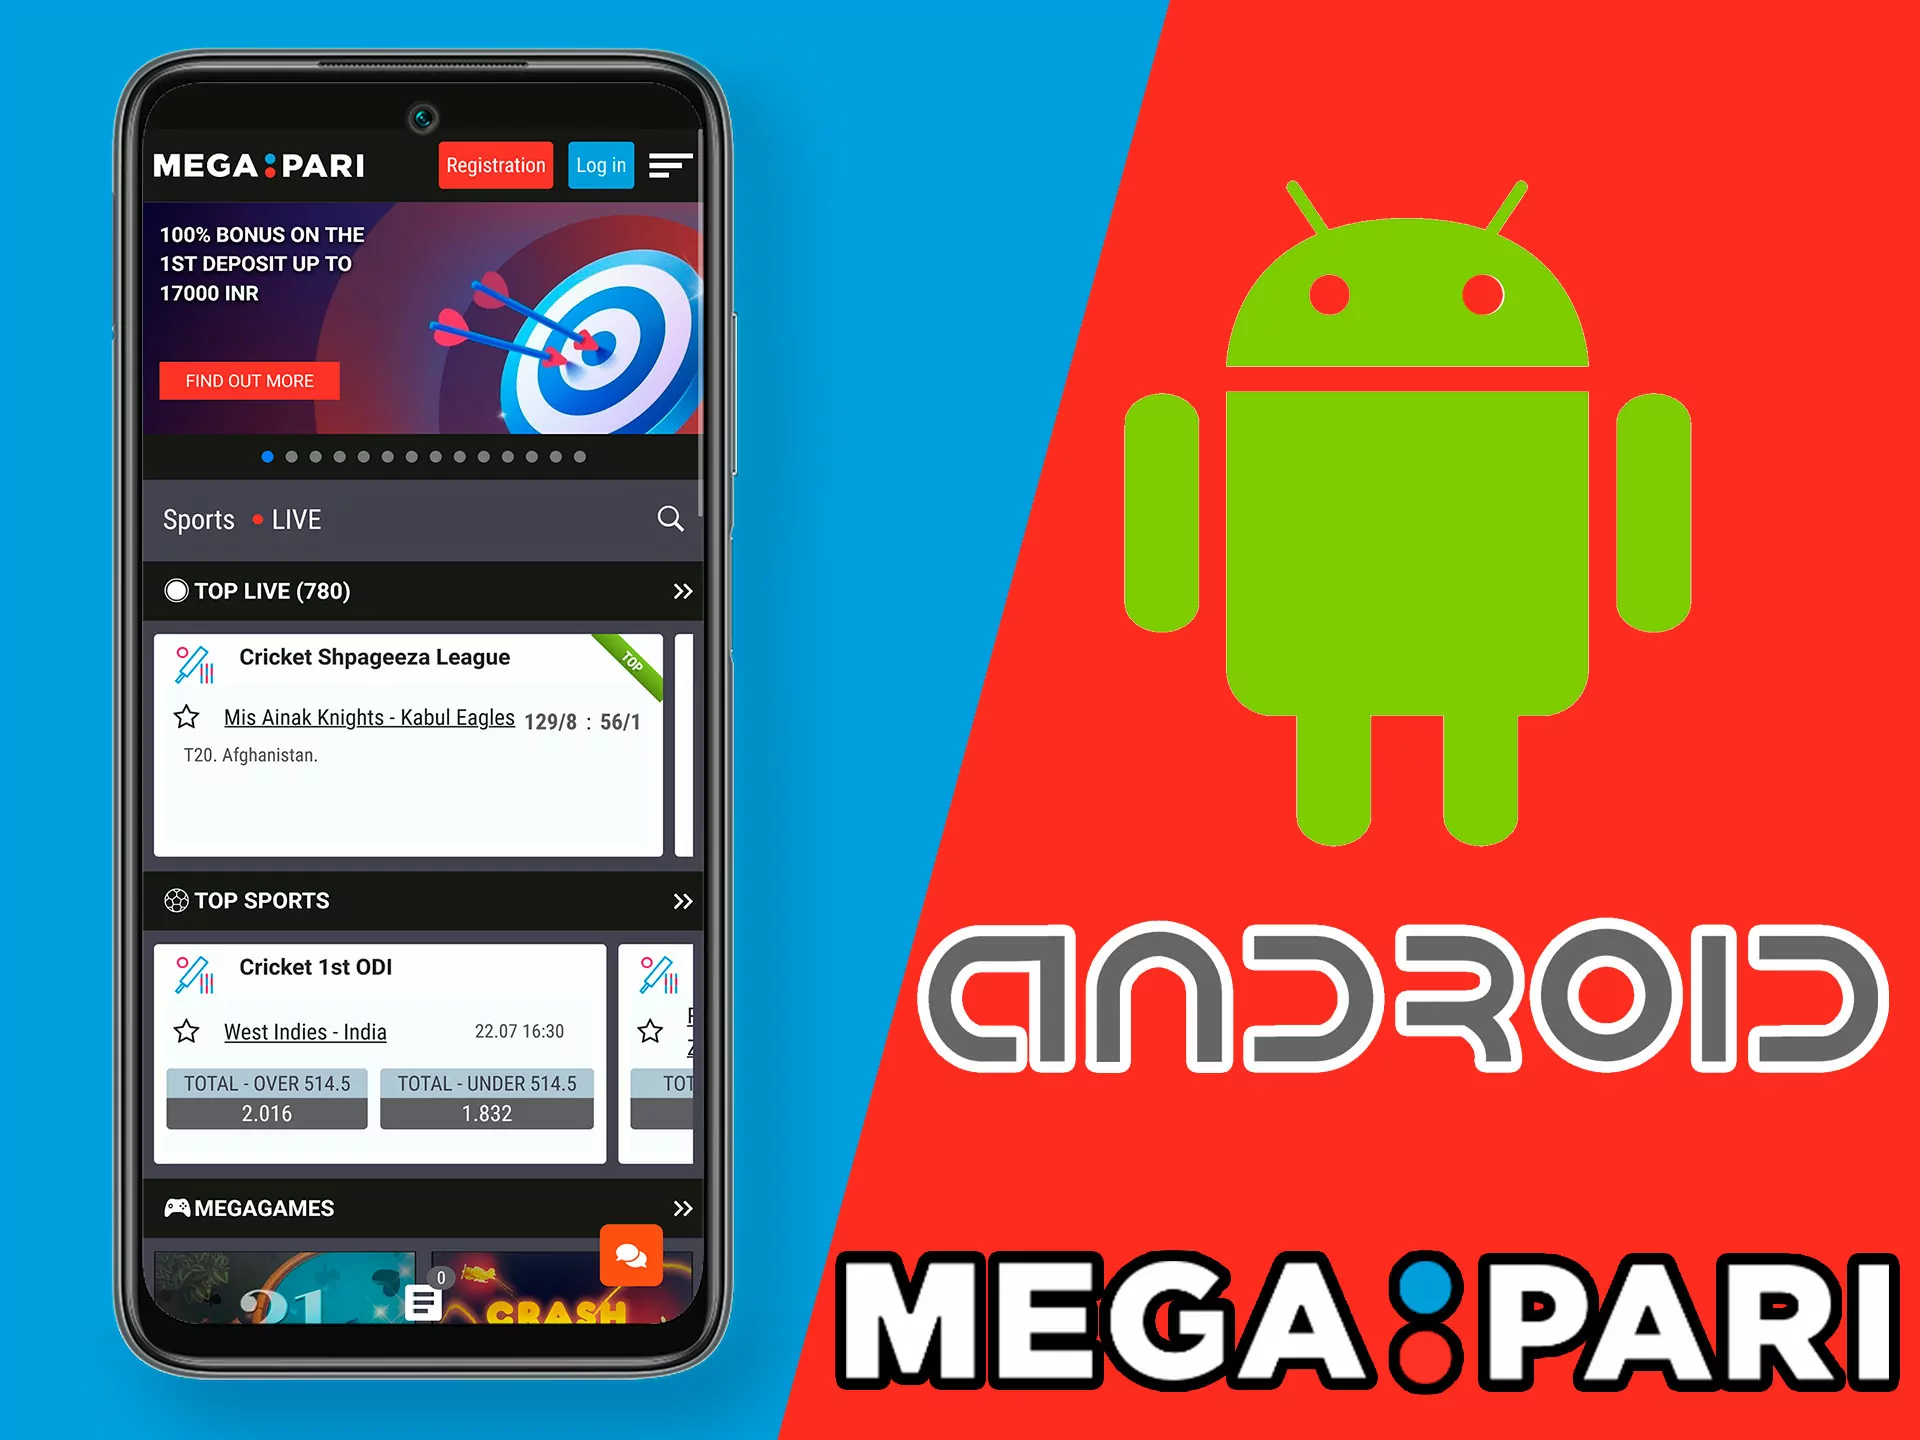 Most players prefer to bet from a mobile device, the Play Store policy does not allow downloading the application from the store, but it can be downloaded from the official website of the bookmaker.